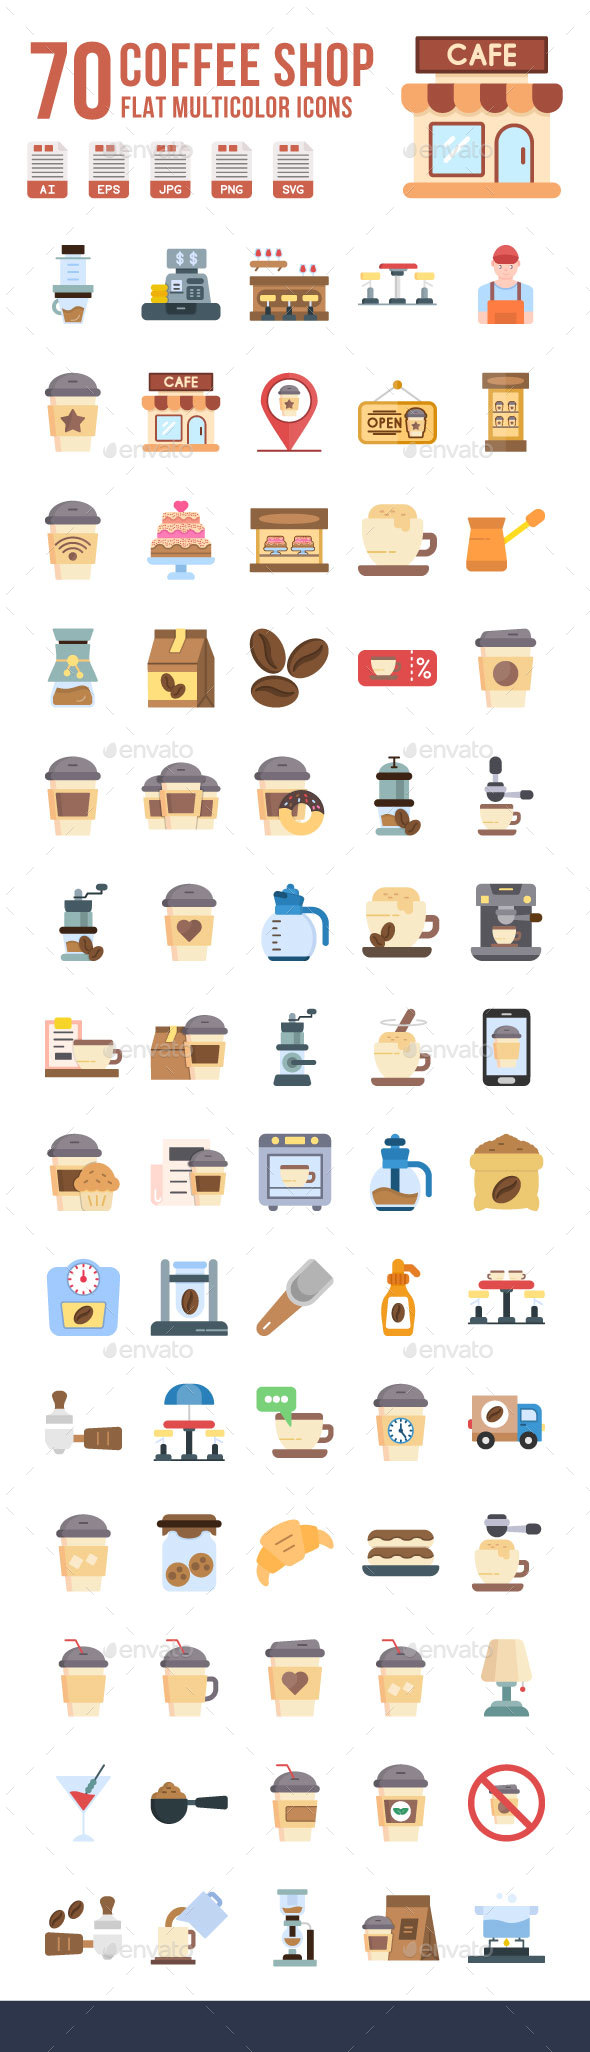 [DOWNLOAD]Coffee Shop Flat Icons